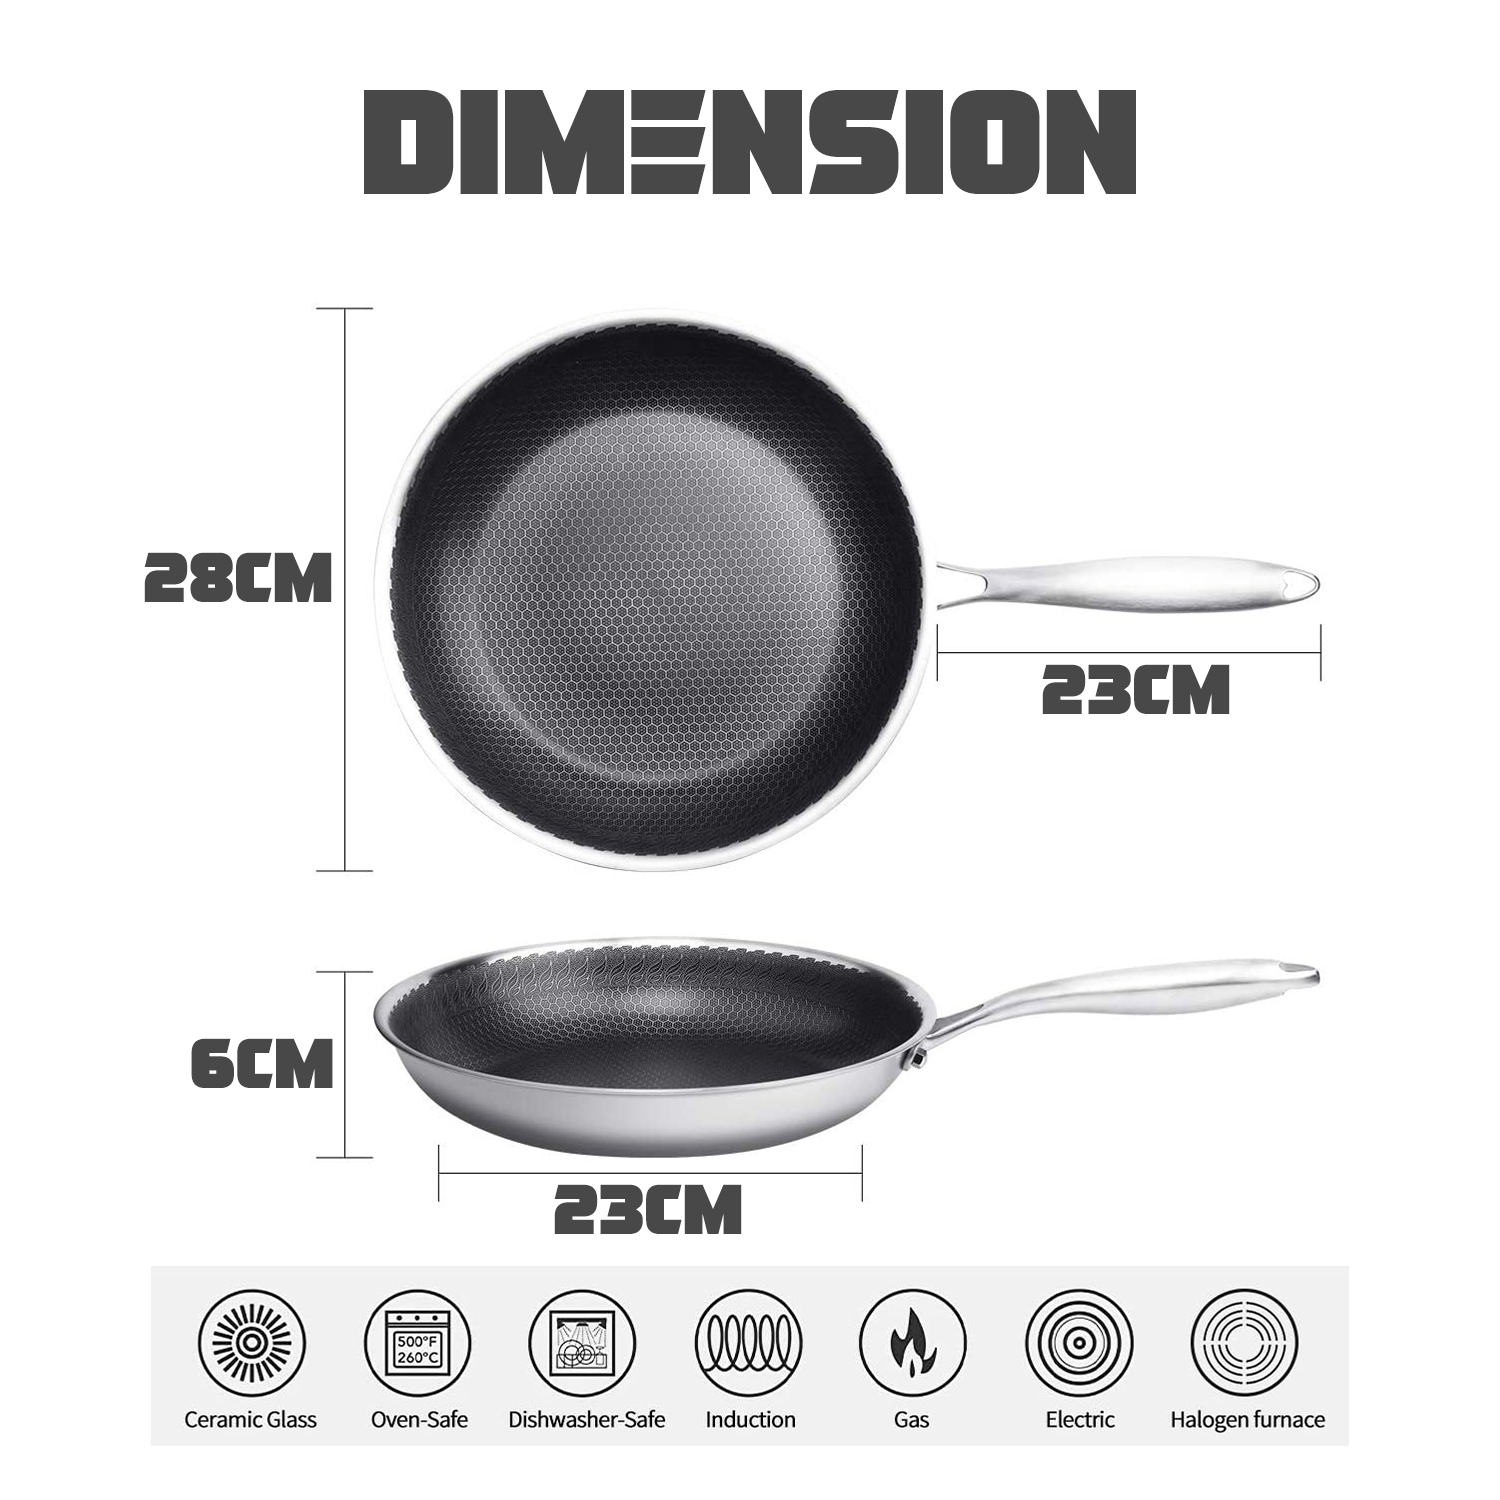 28CM / 30CM 3 LAYER STAINLESS STEEL FRYING PAN WITH GLASS LID MULTIPURPOSE NON-STICK HONEYCOMB FRYING PAN